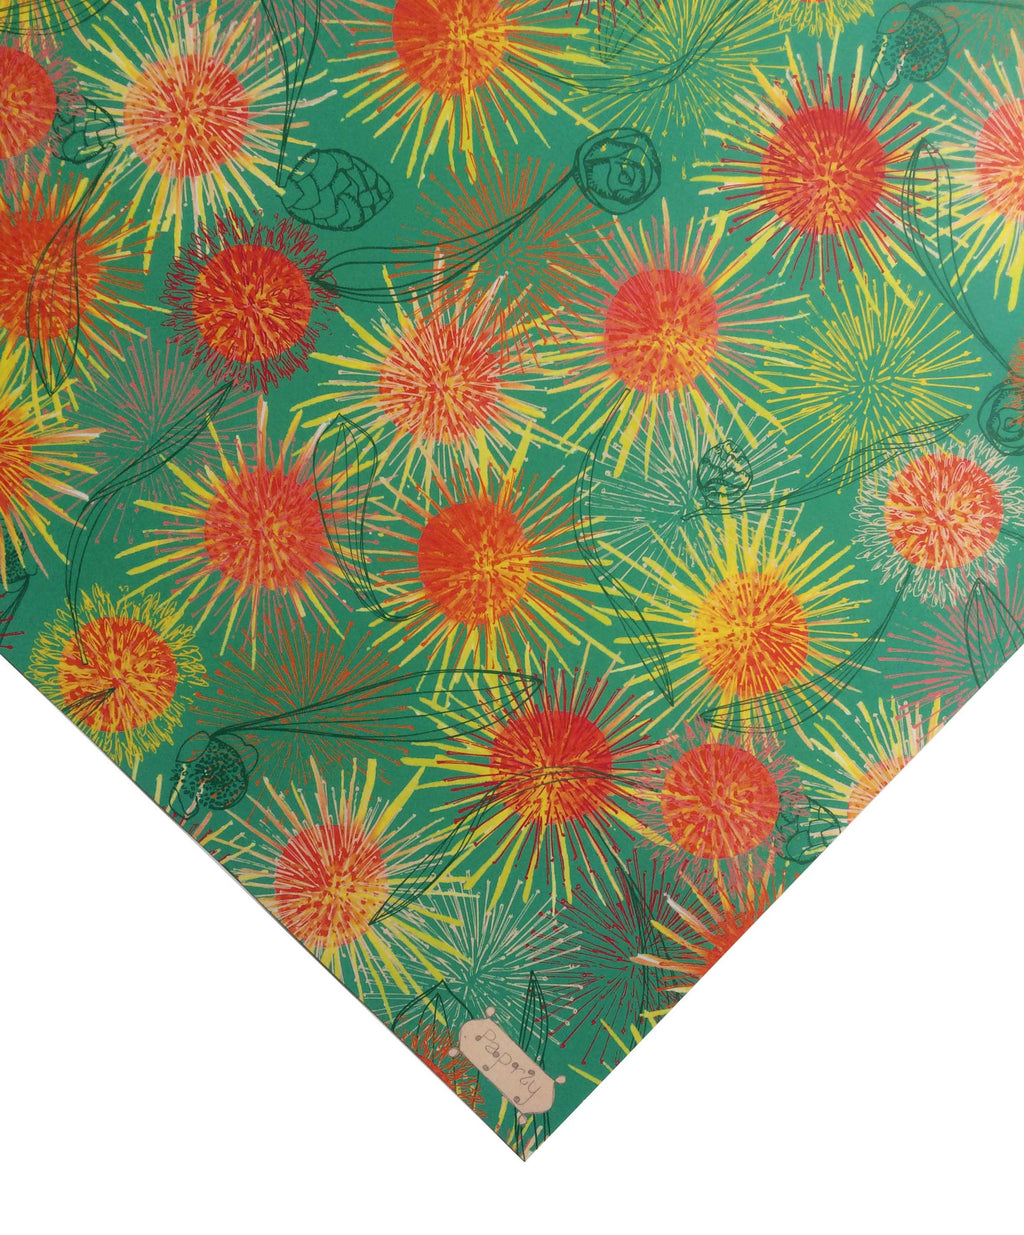 Hakea Fireworks Flower Gift Wrapping Paper